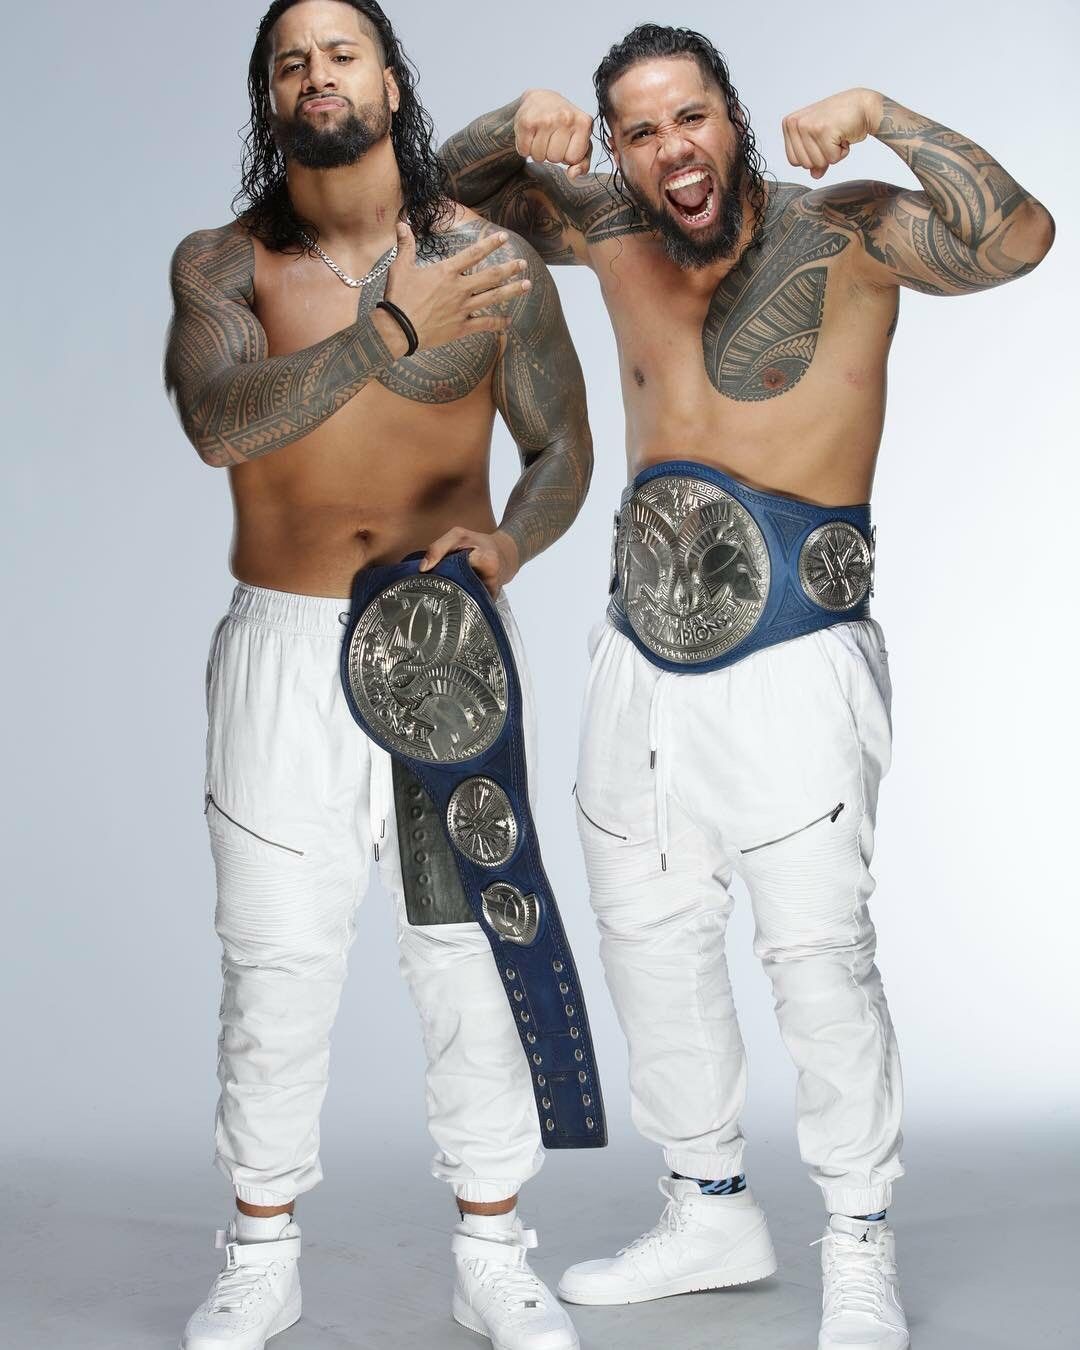 SmackDown Tag Champions The USOS